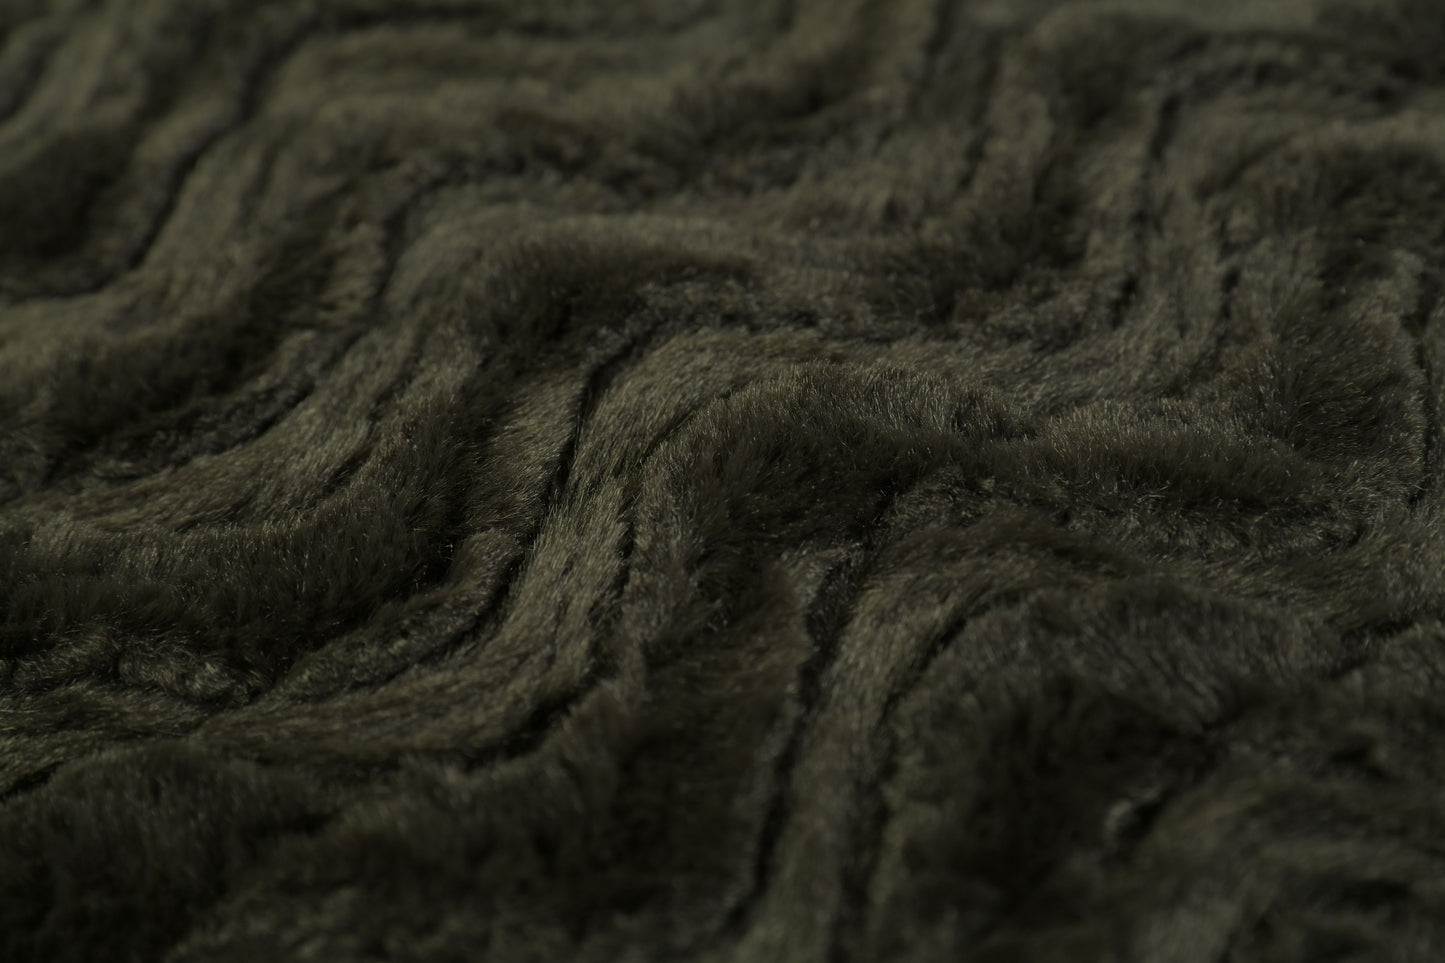 500Gsm Faux Fur Heated Throw Charcoal